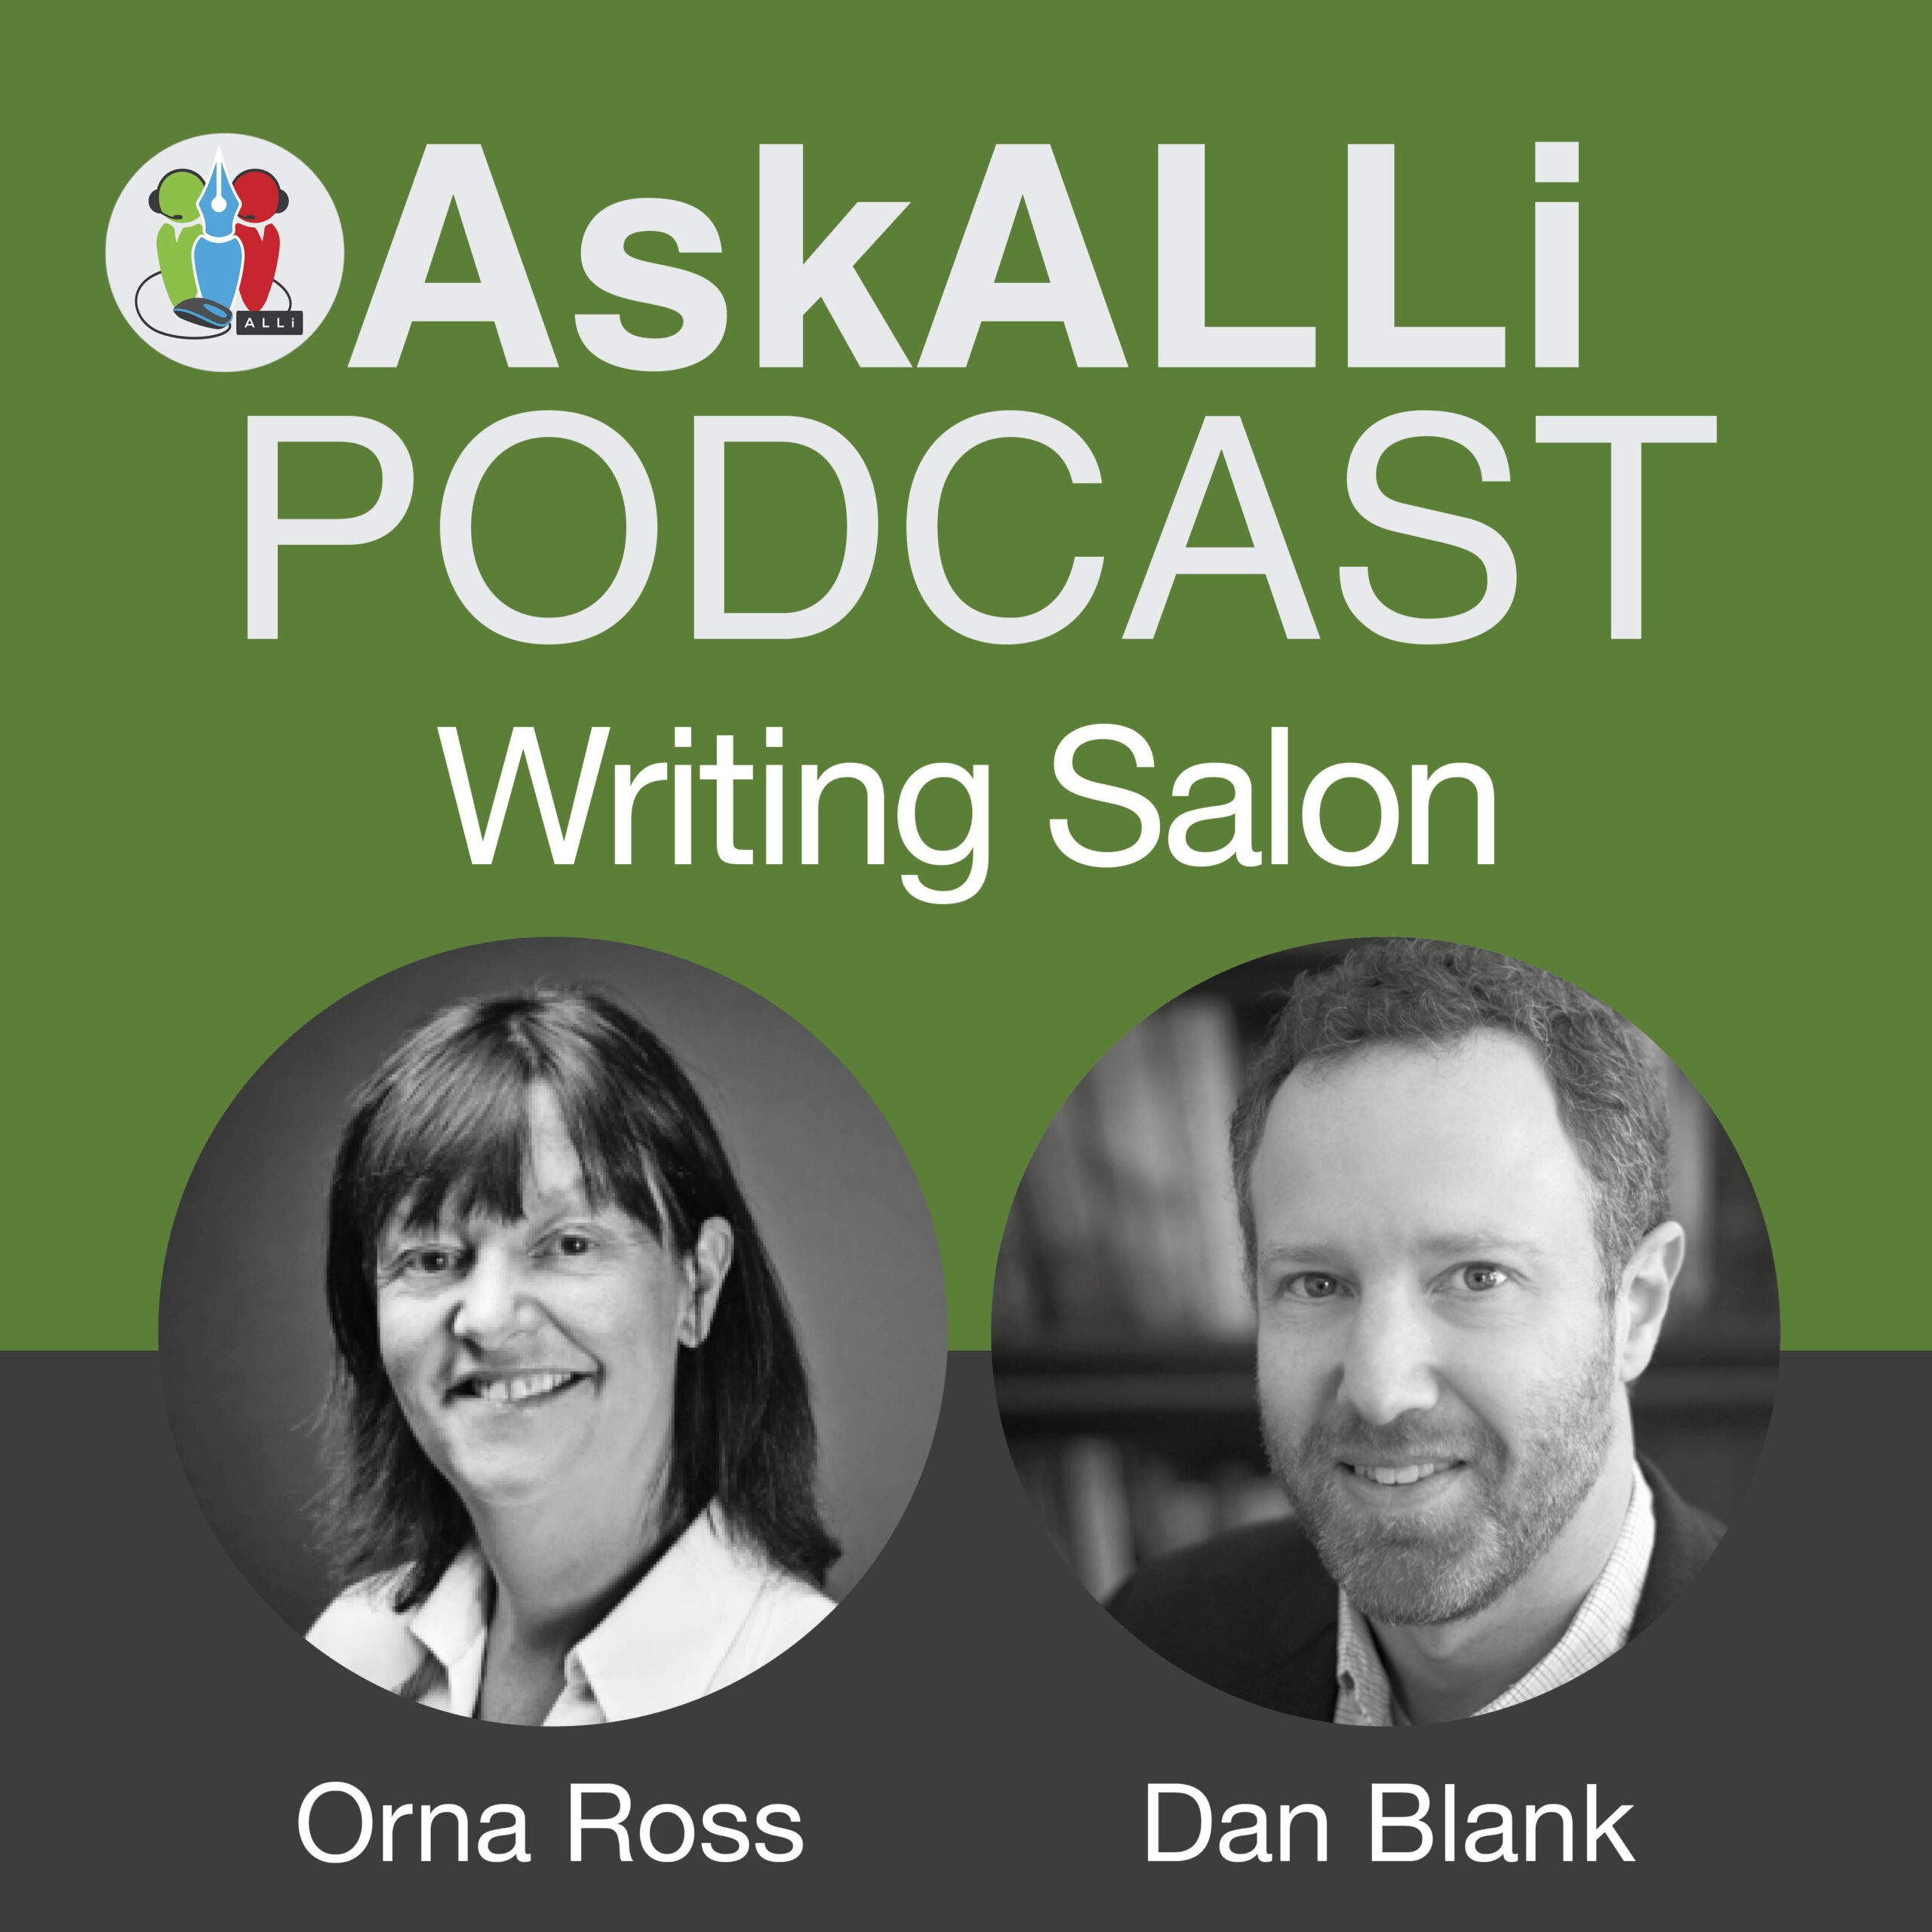 How To Craft And Share Your Creative Work So Fans Want More And Inspirational Indie Author Adam Croft: AskALLi Writing Salon With Orna Ross And Dan Blank February 2019